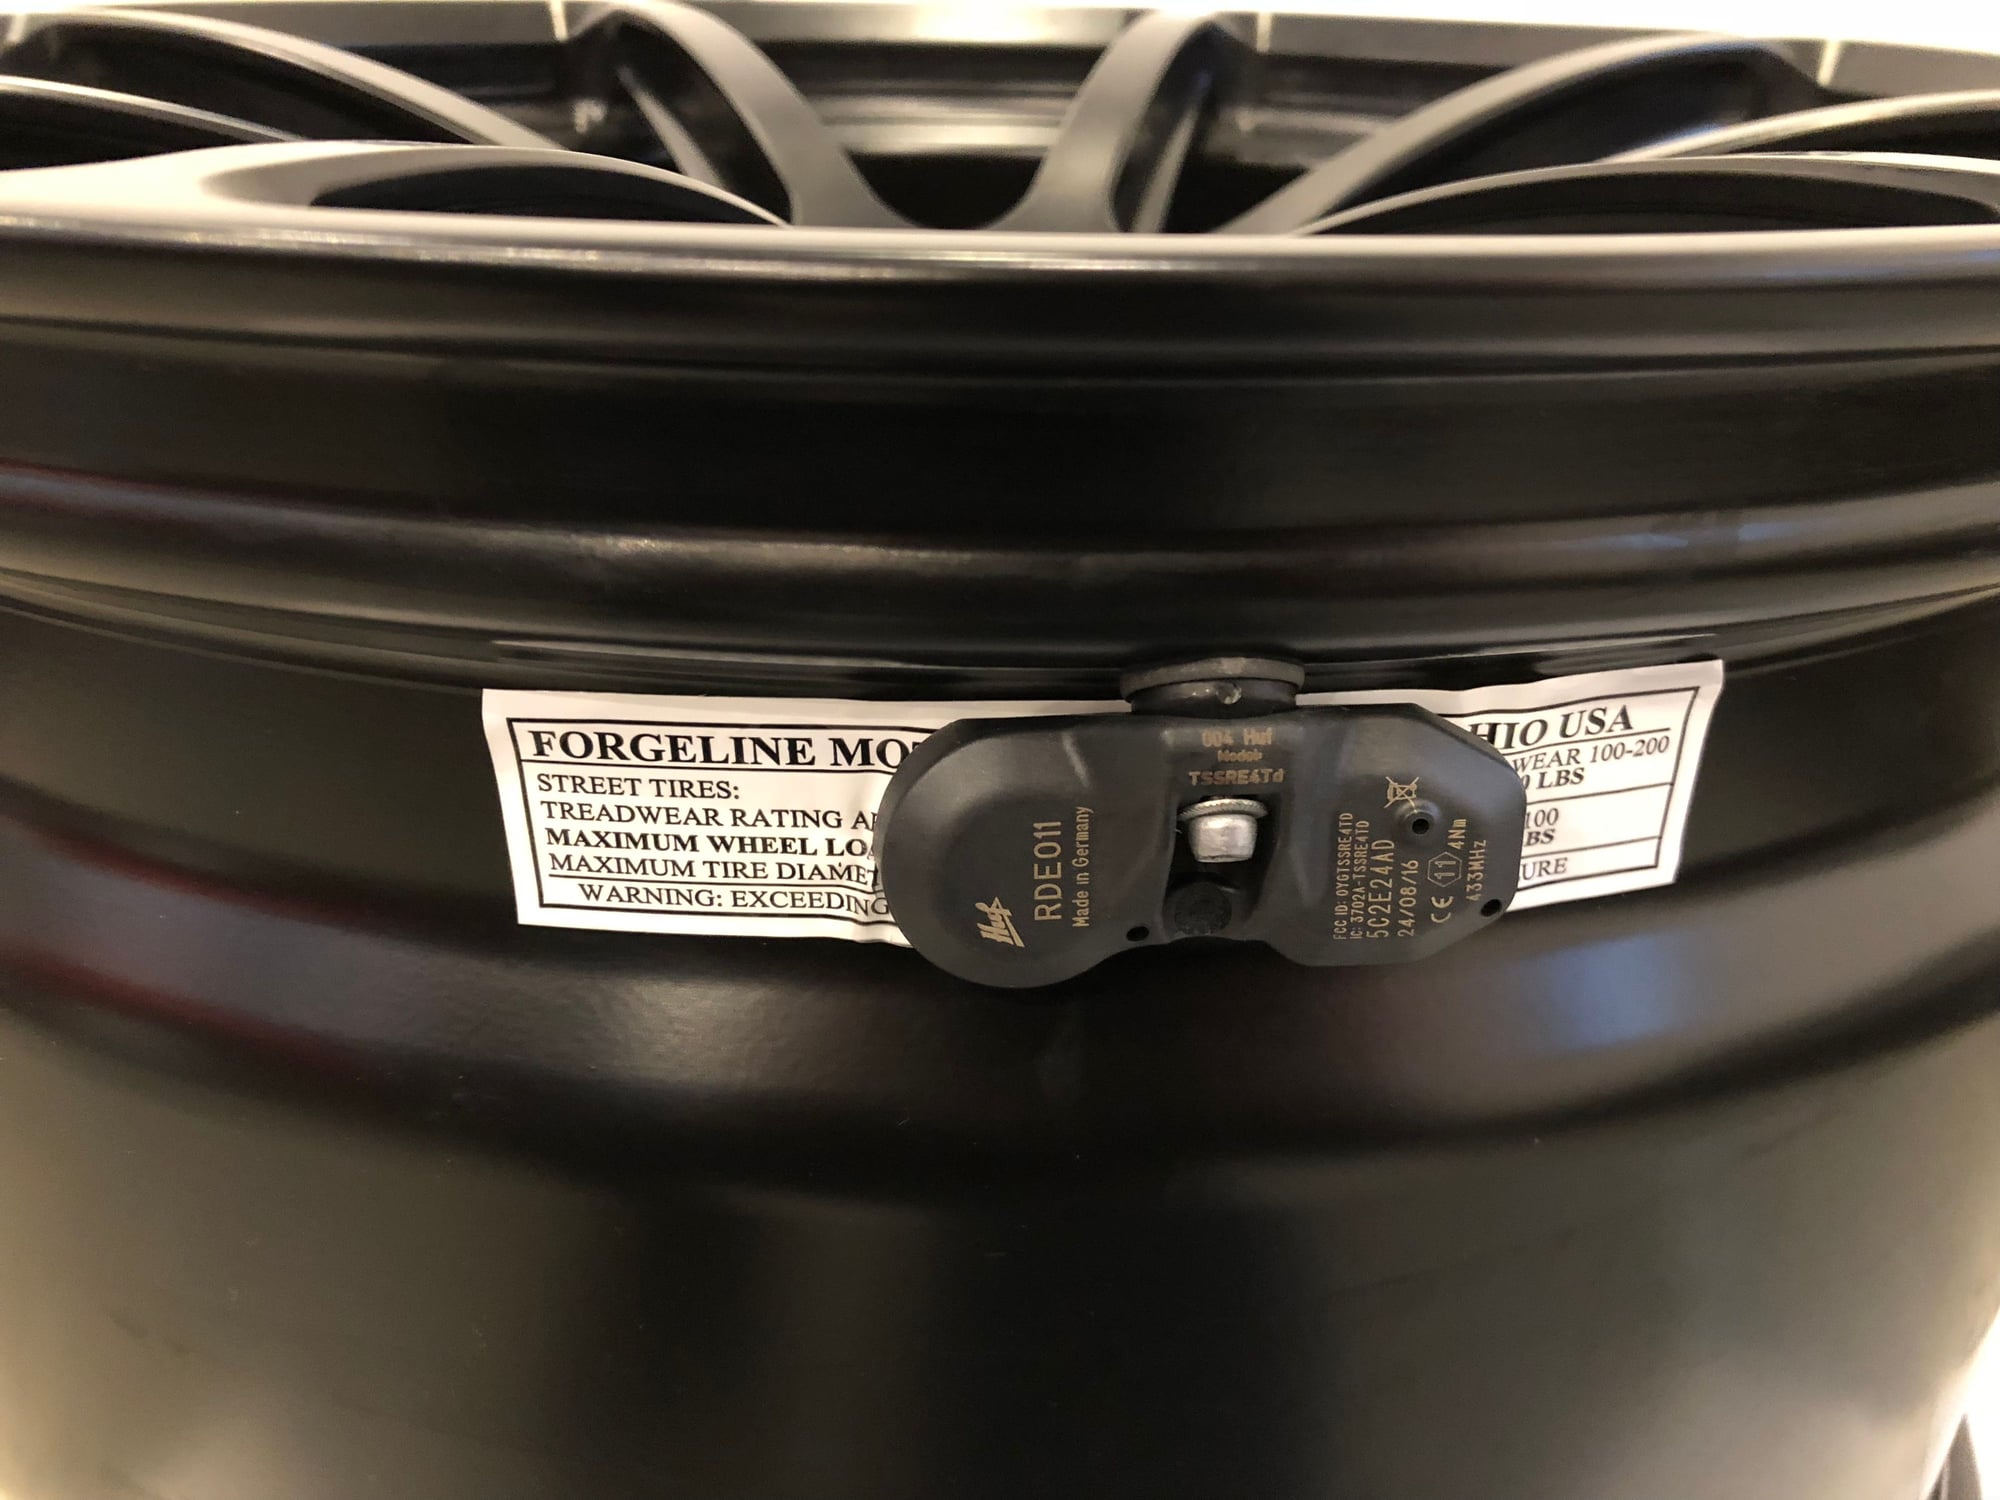 Wheels and Tires/Axles - Forgeline GE1 - Center Lock Wheels - MINT! - Used - 2012 to 2019 Porsche 911 - Milton, VT 05468, United States